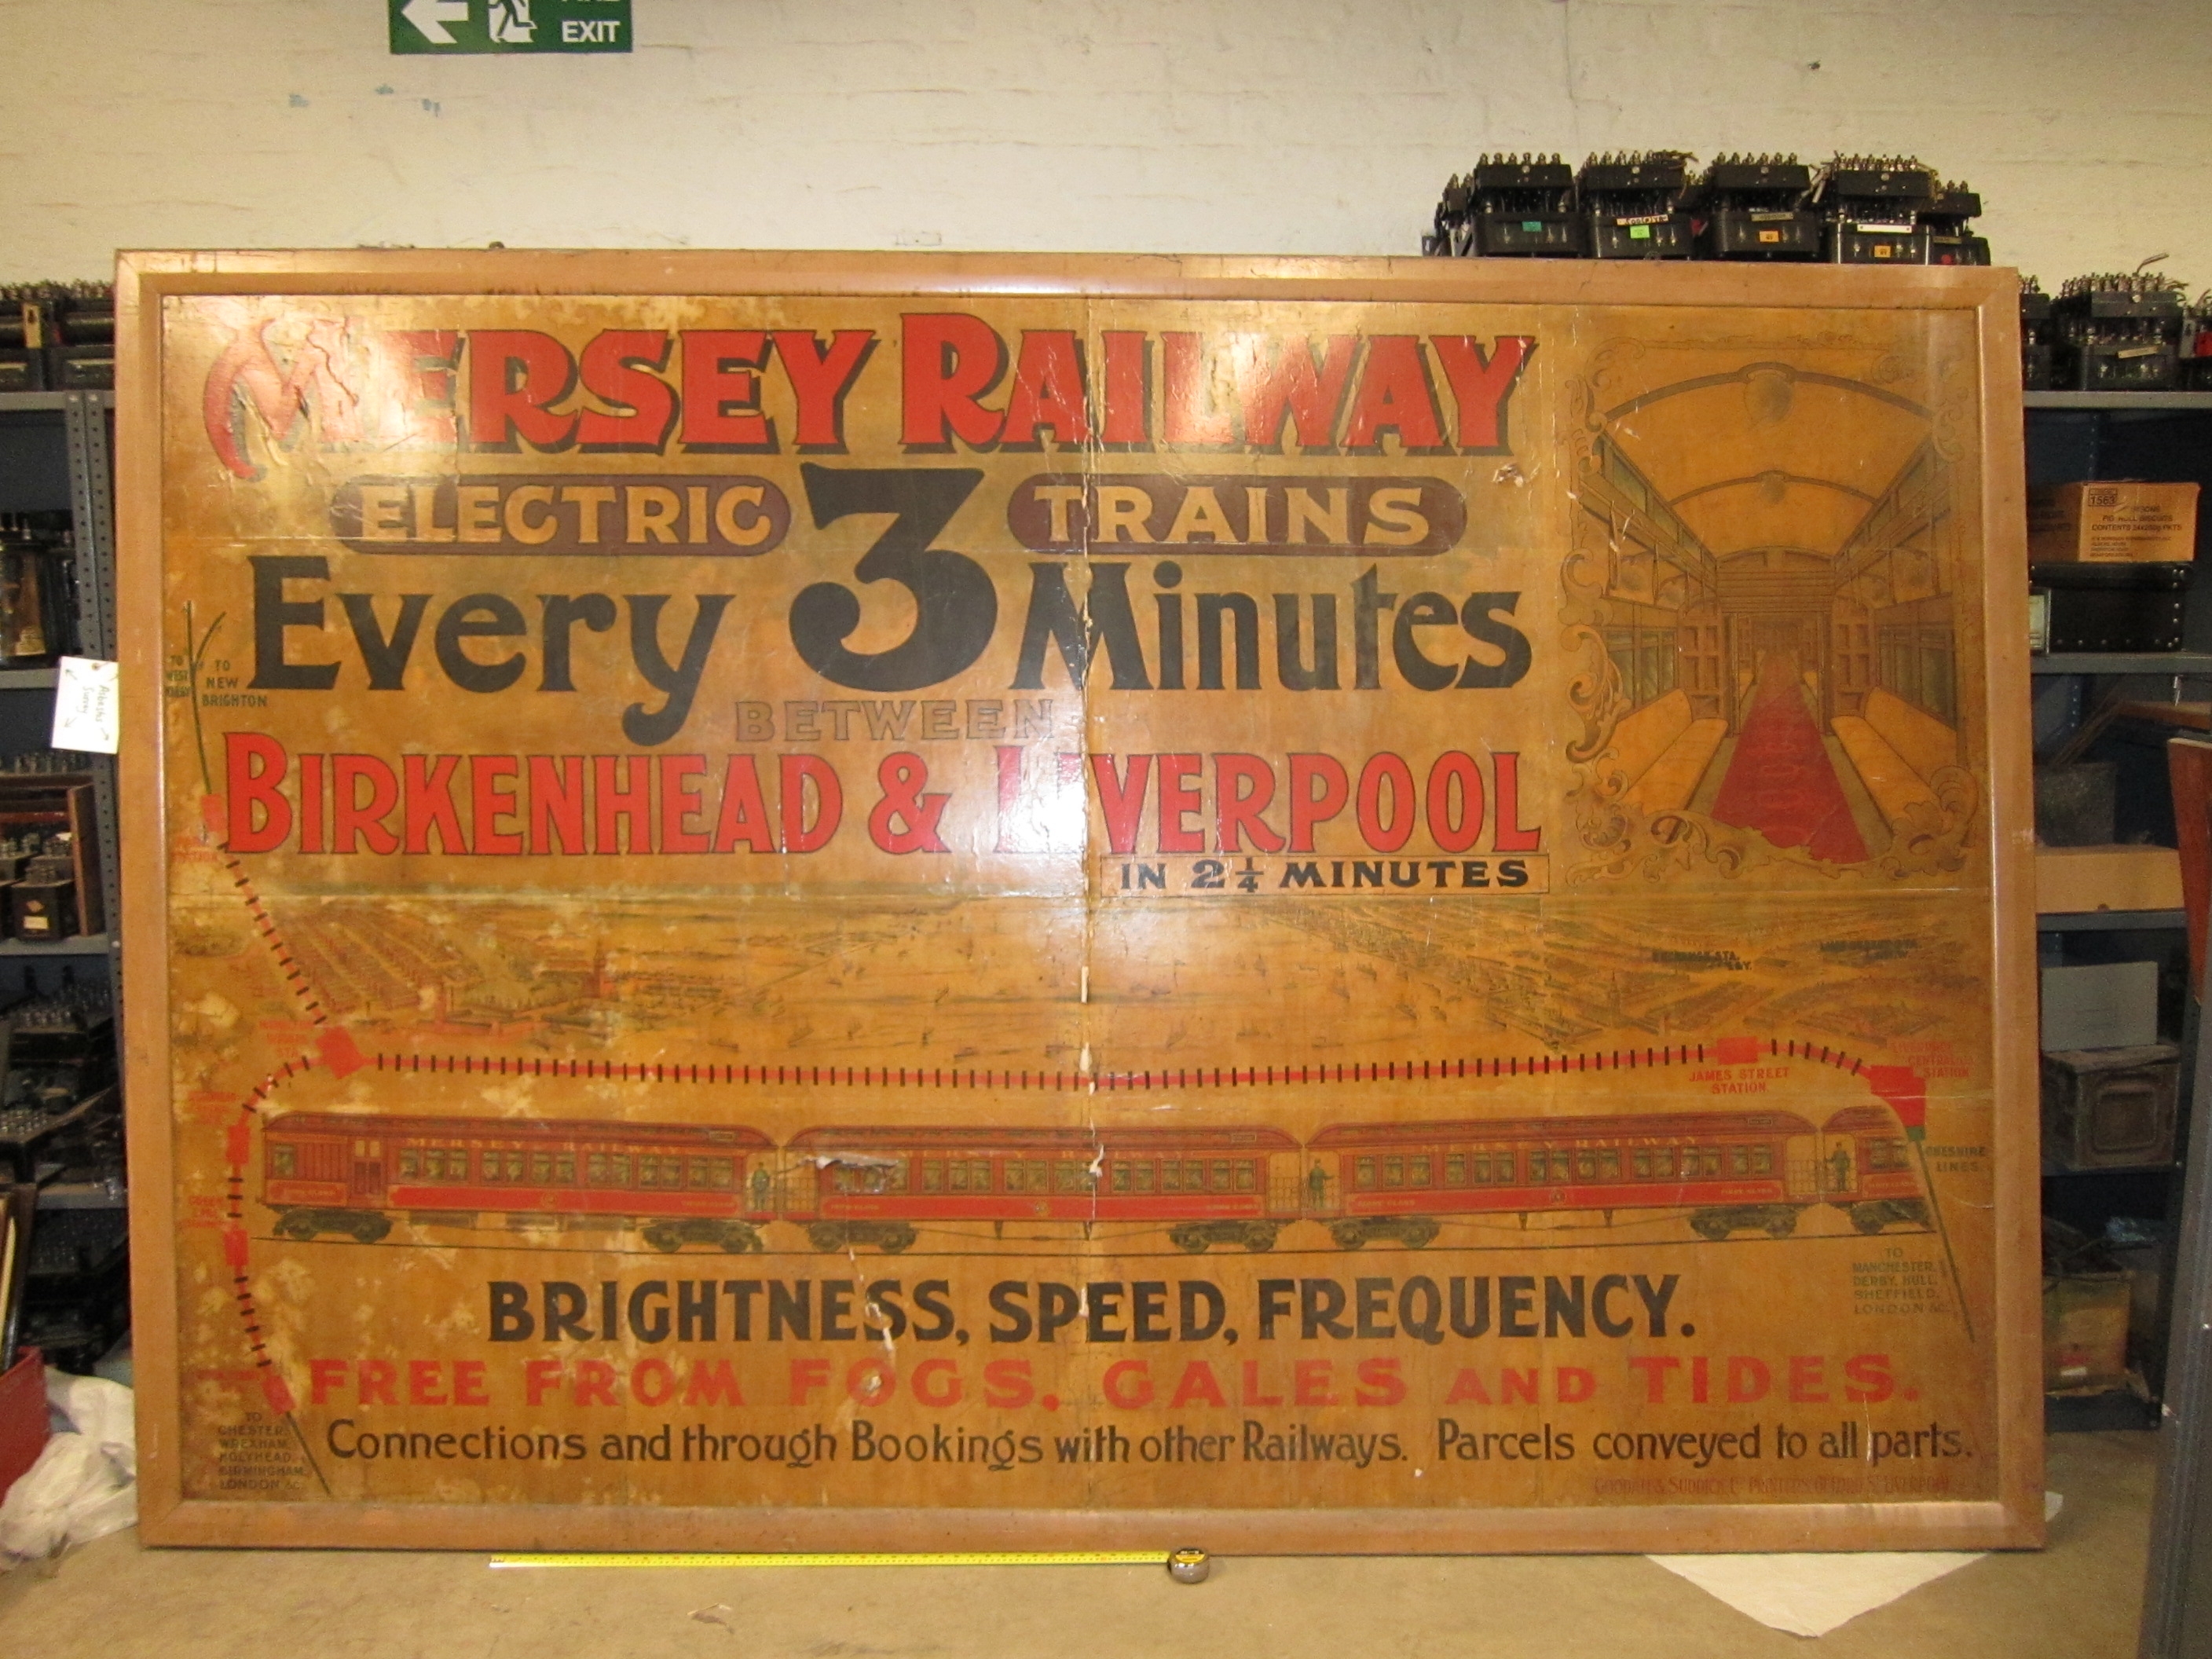 Mersey Railway poster, before conservation, Sept 2011